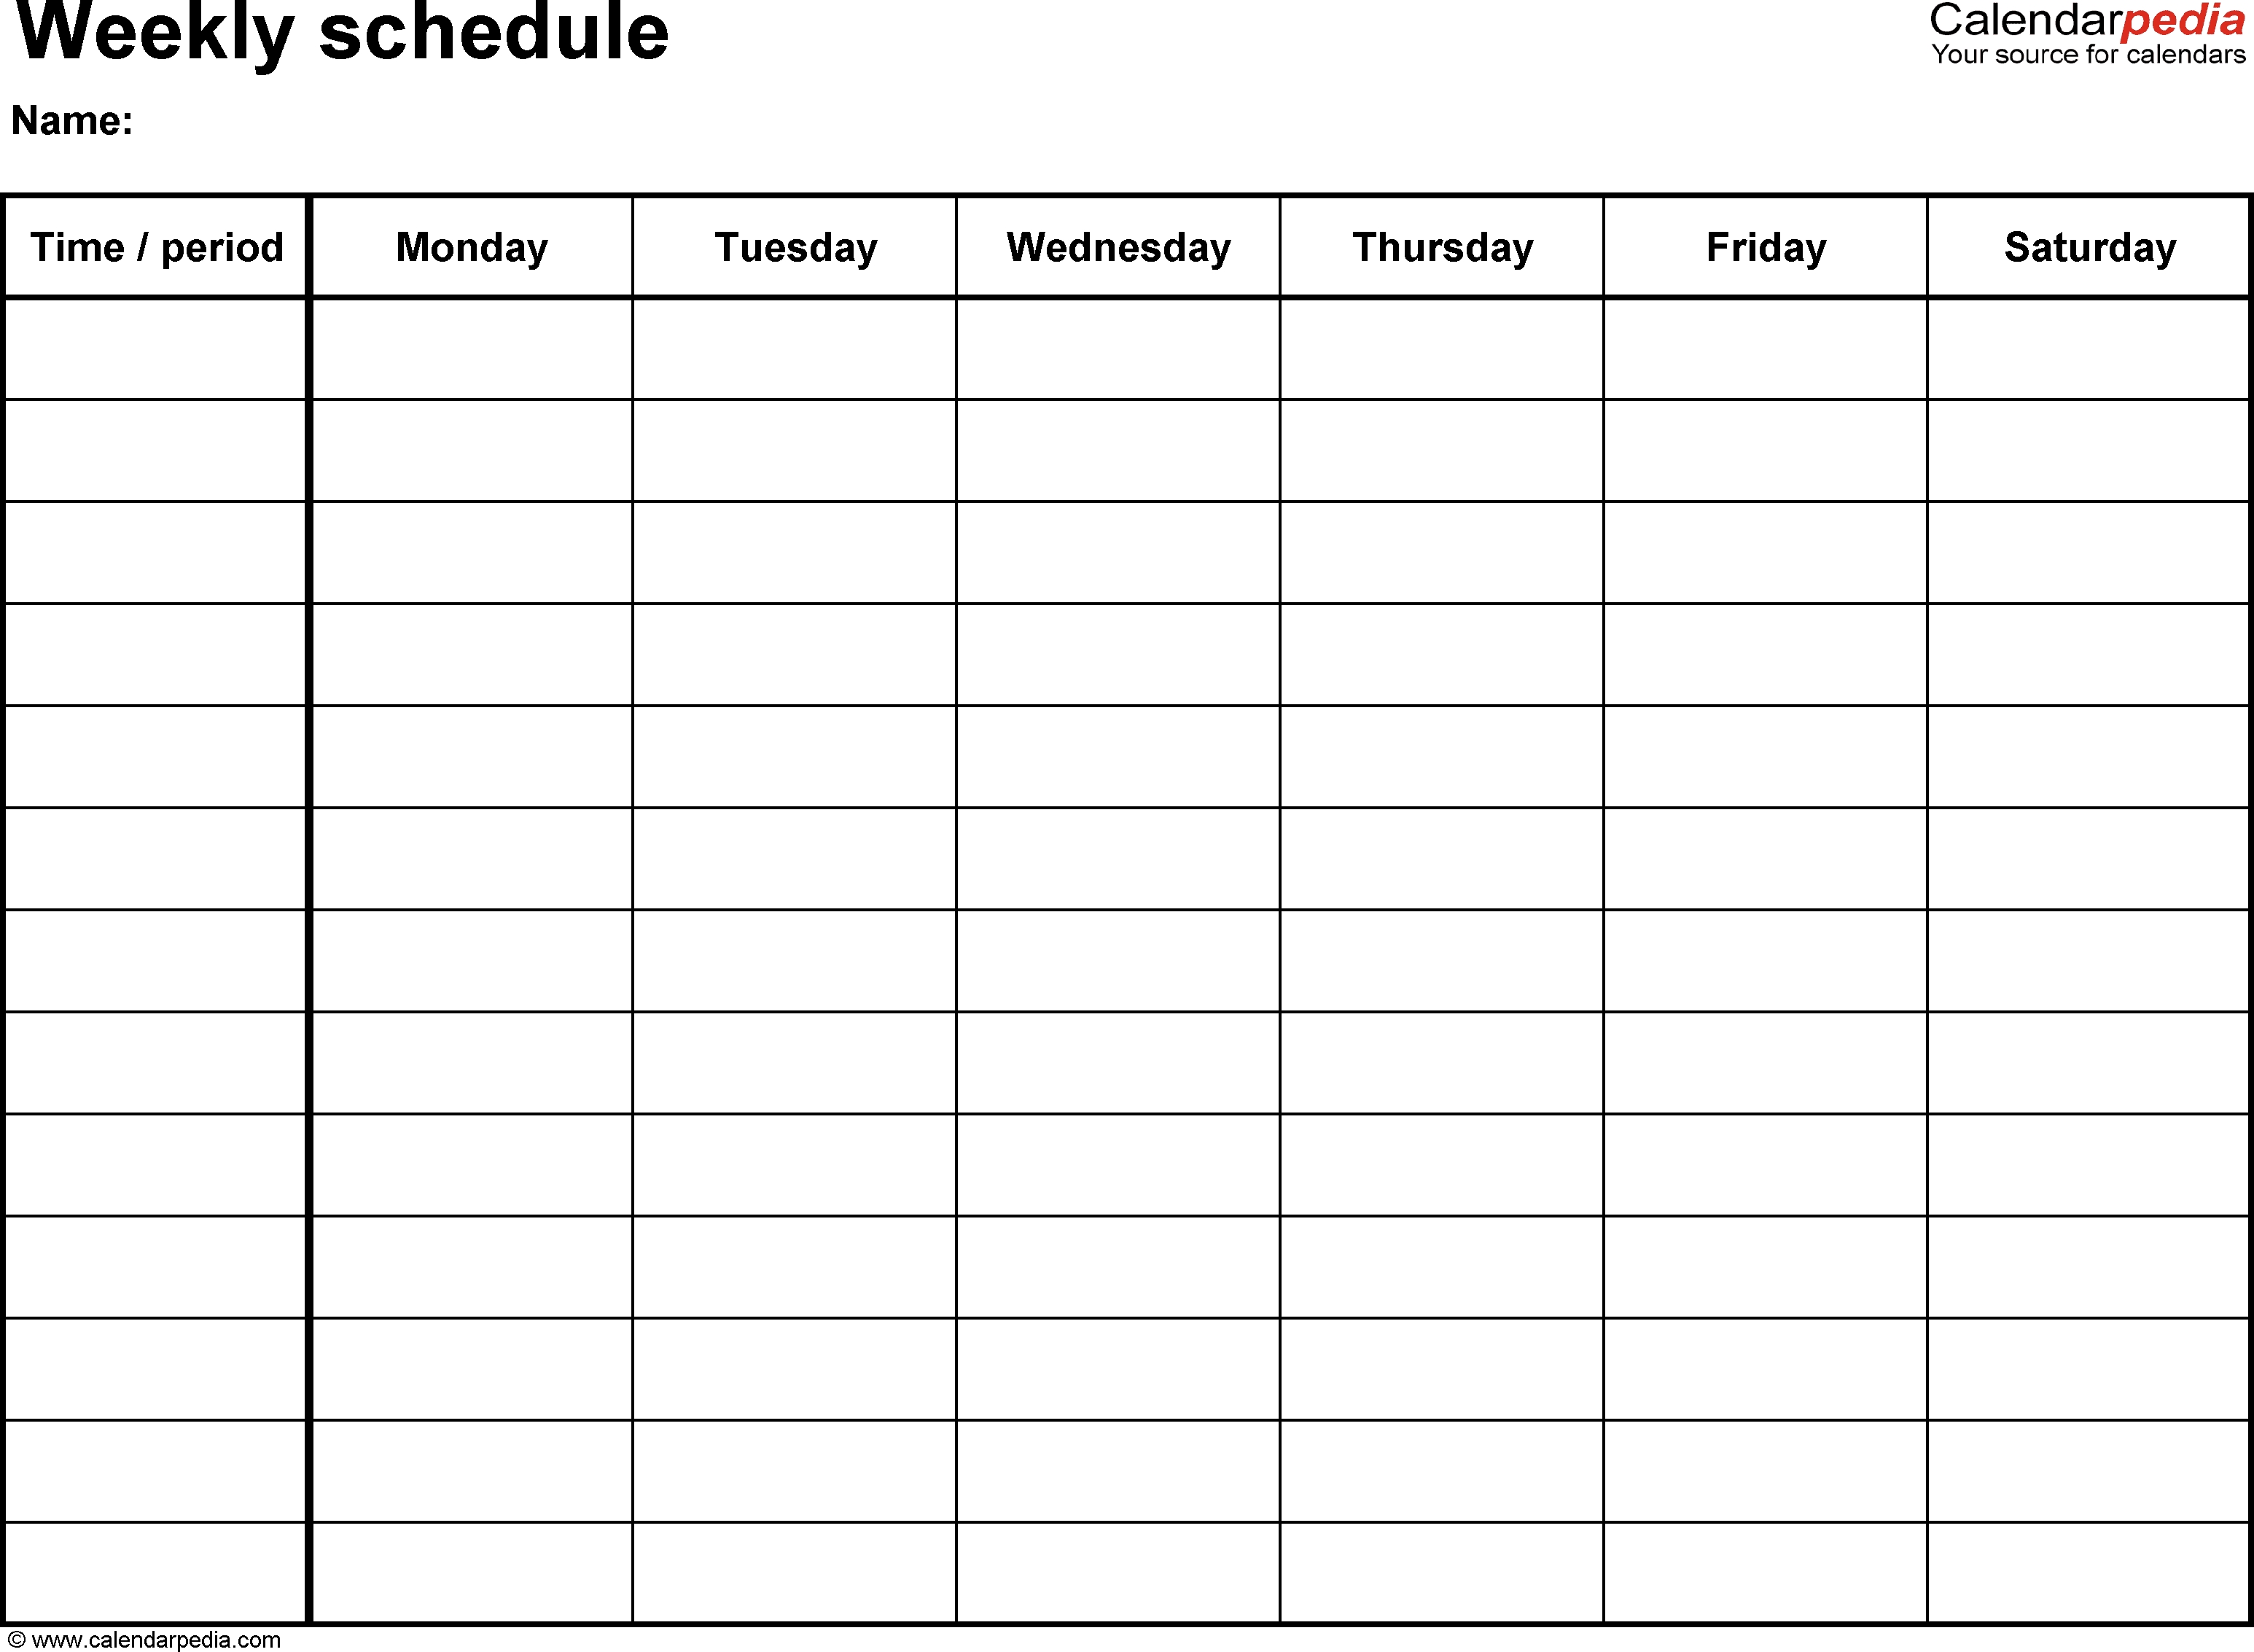 Schedule Template Daily Calendar Rintable Free Weekly Templates For intended for One Week Daily Calendar Printable